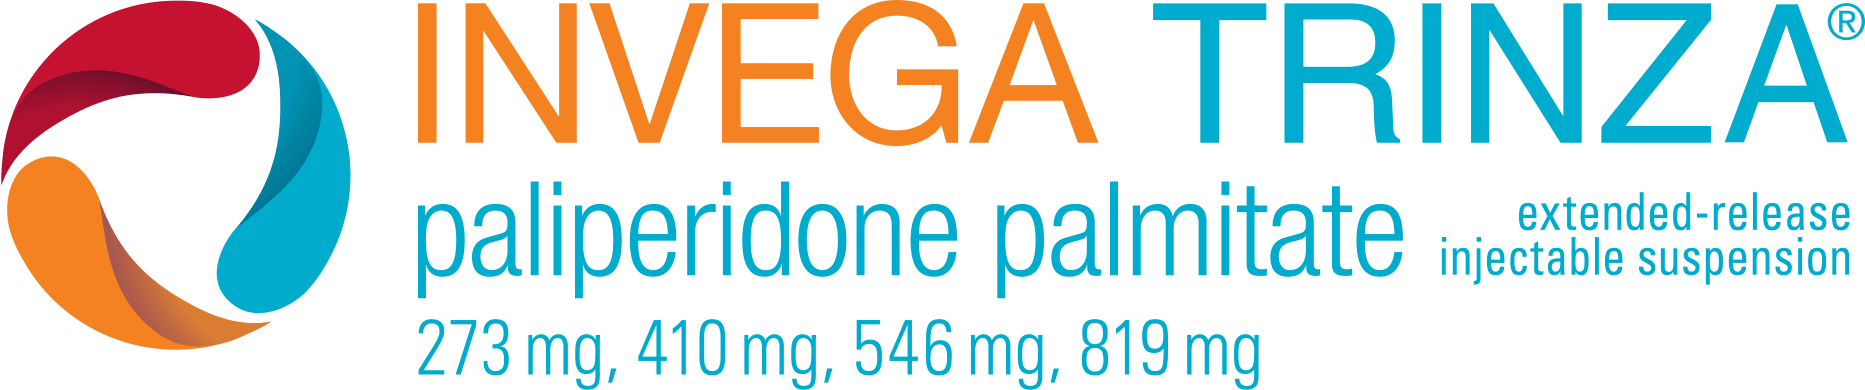 INVEGA TRINZA® (paliperidone palmitate) extended-release injectable suspension